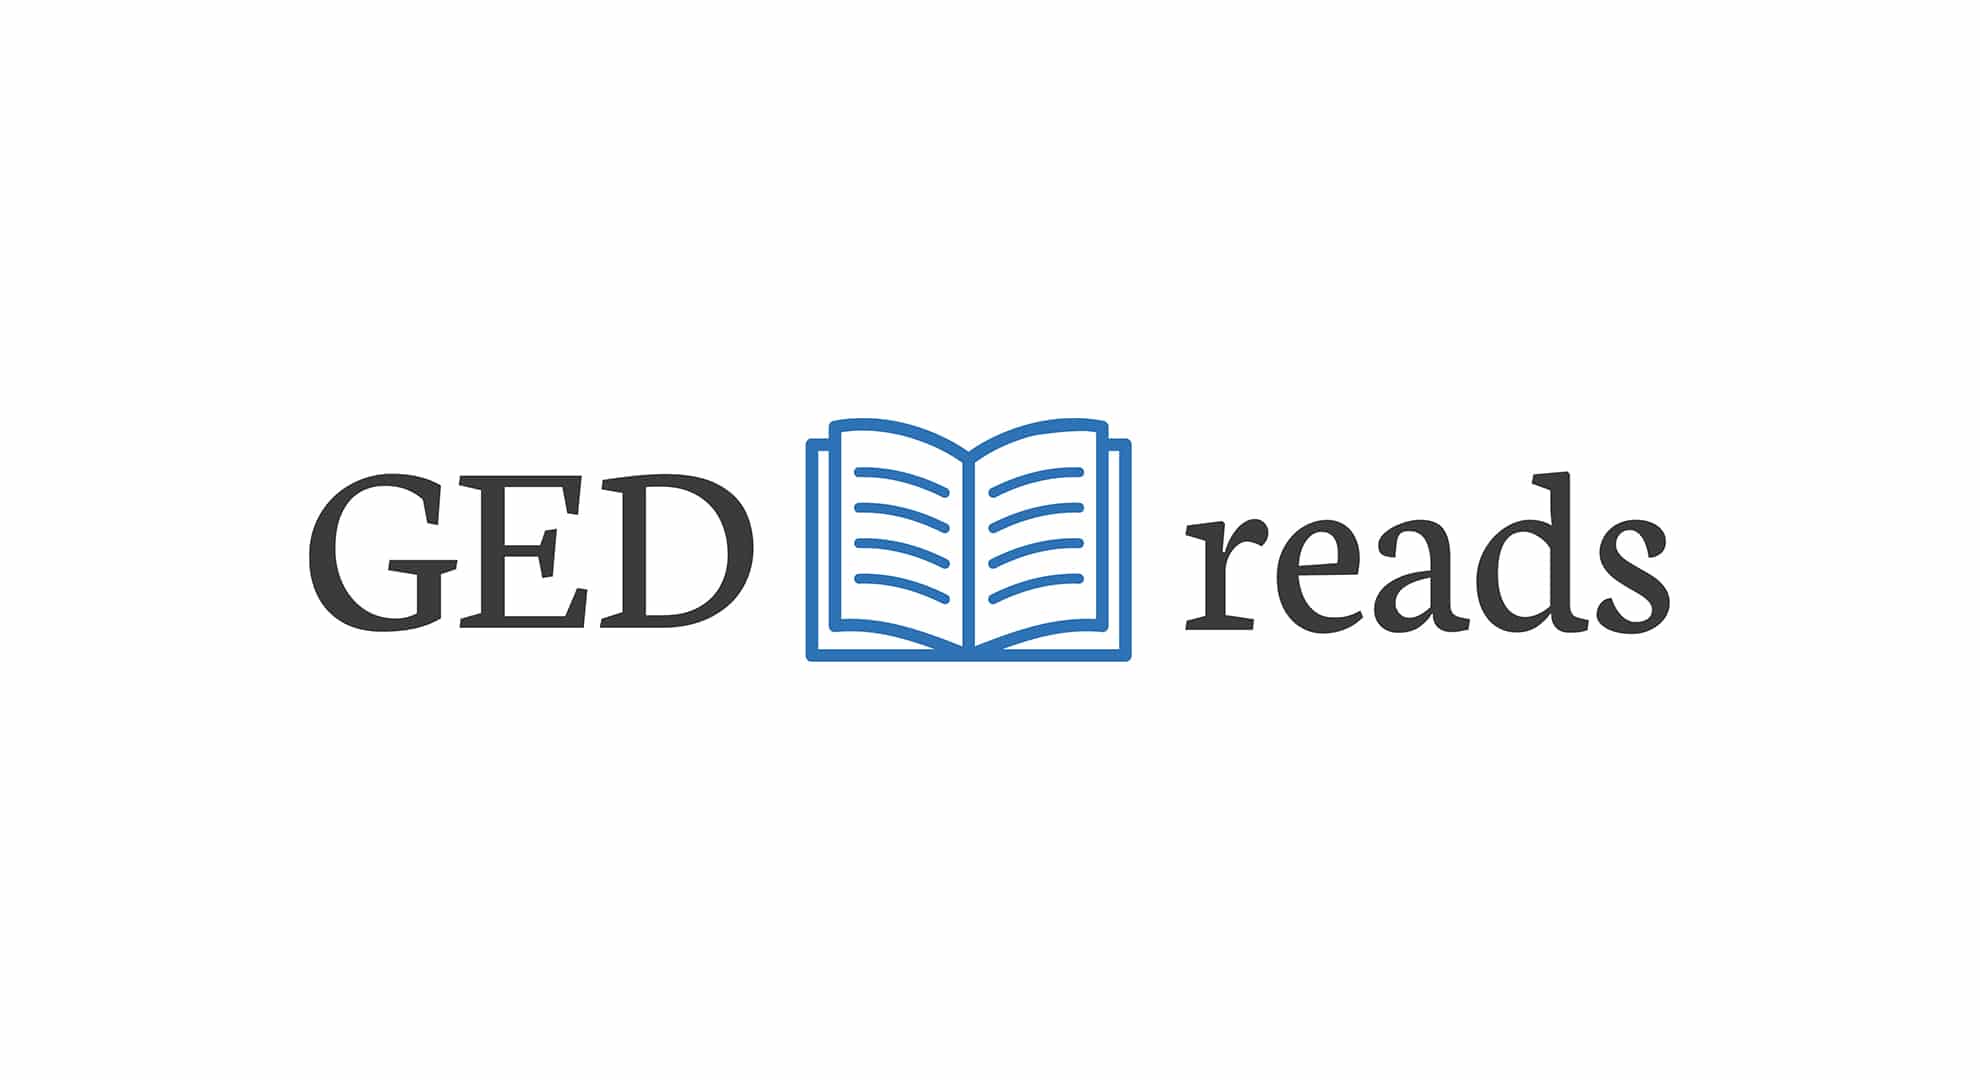 GED READS